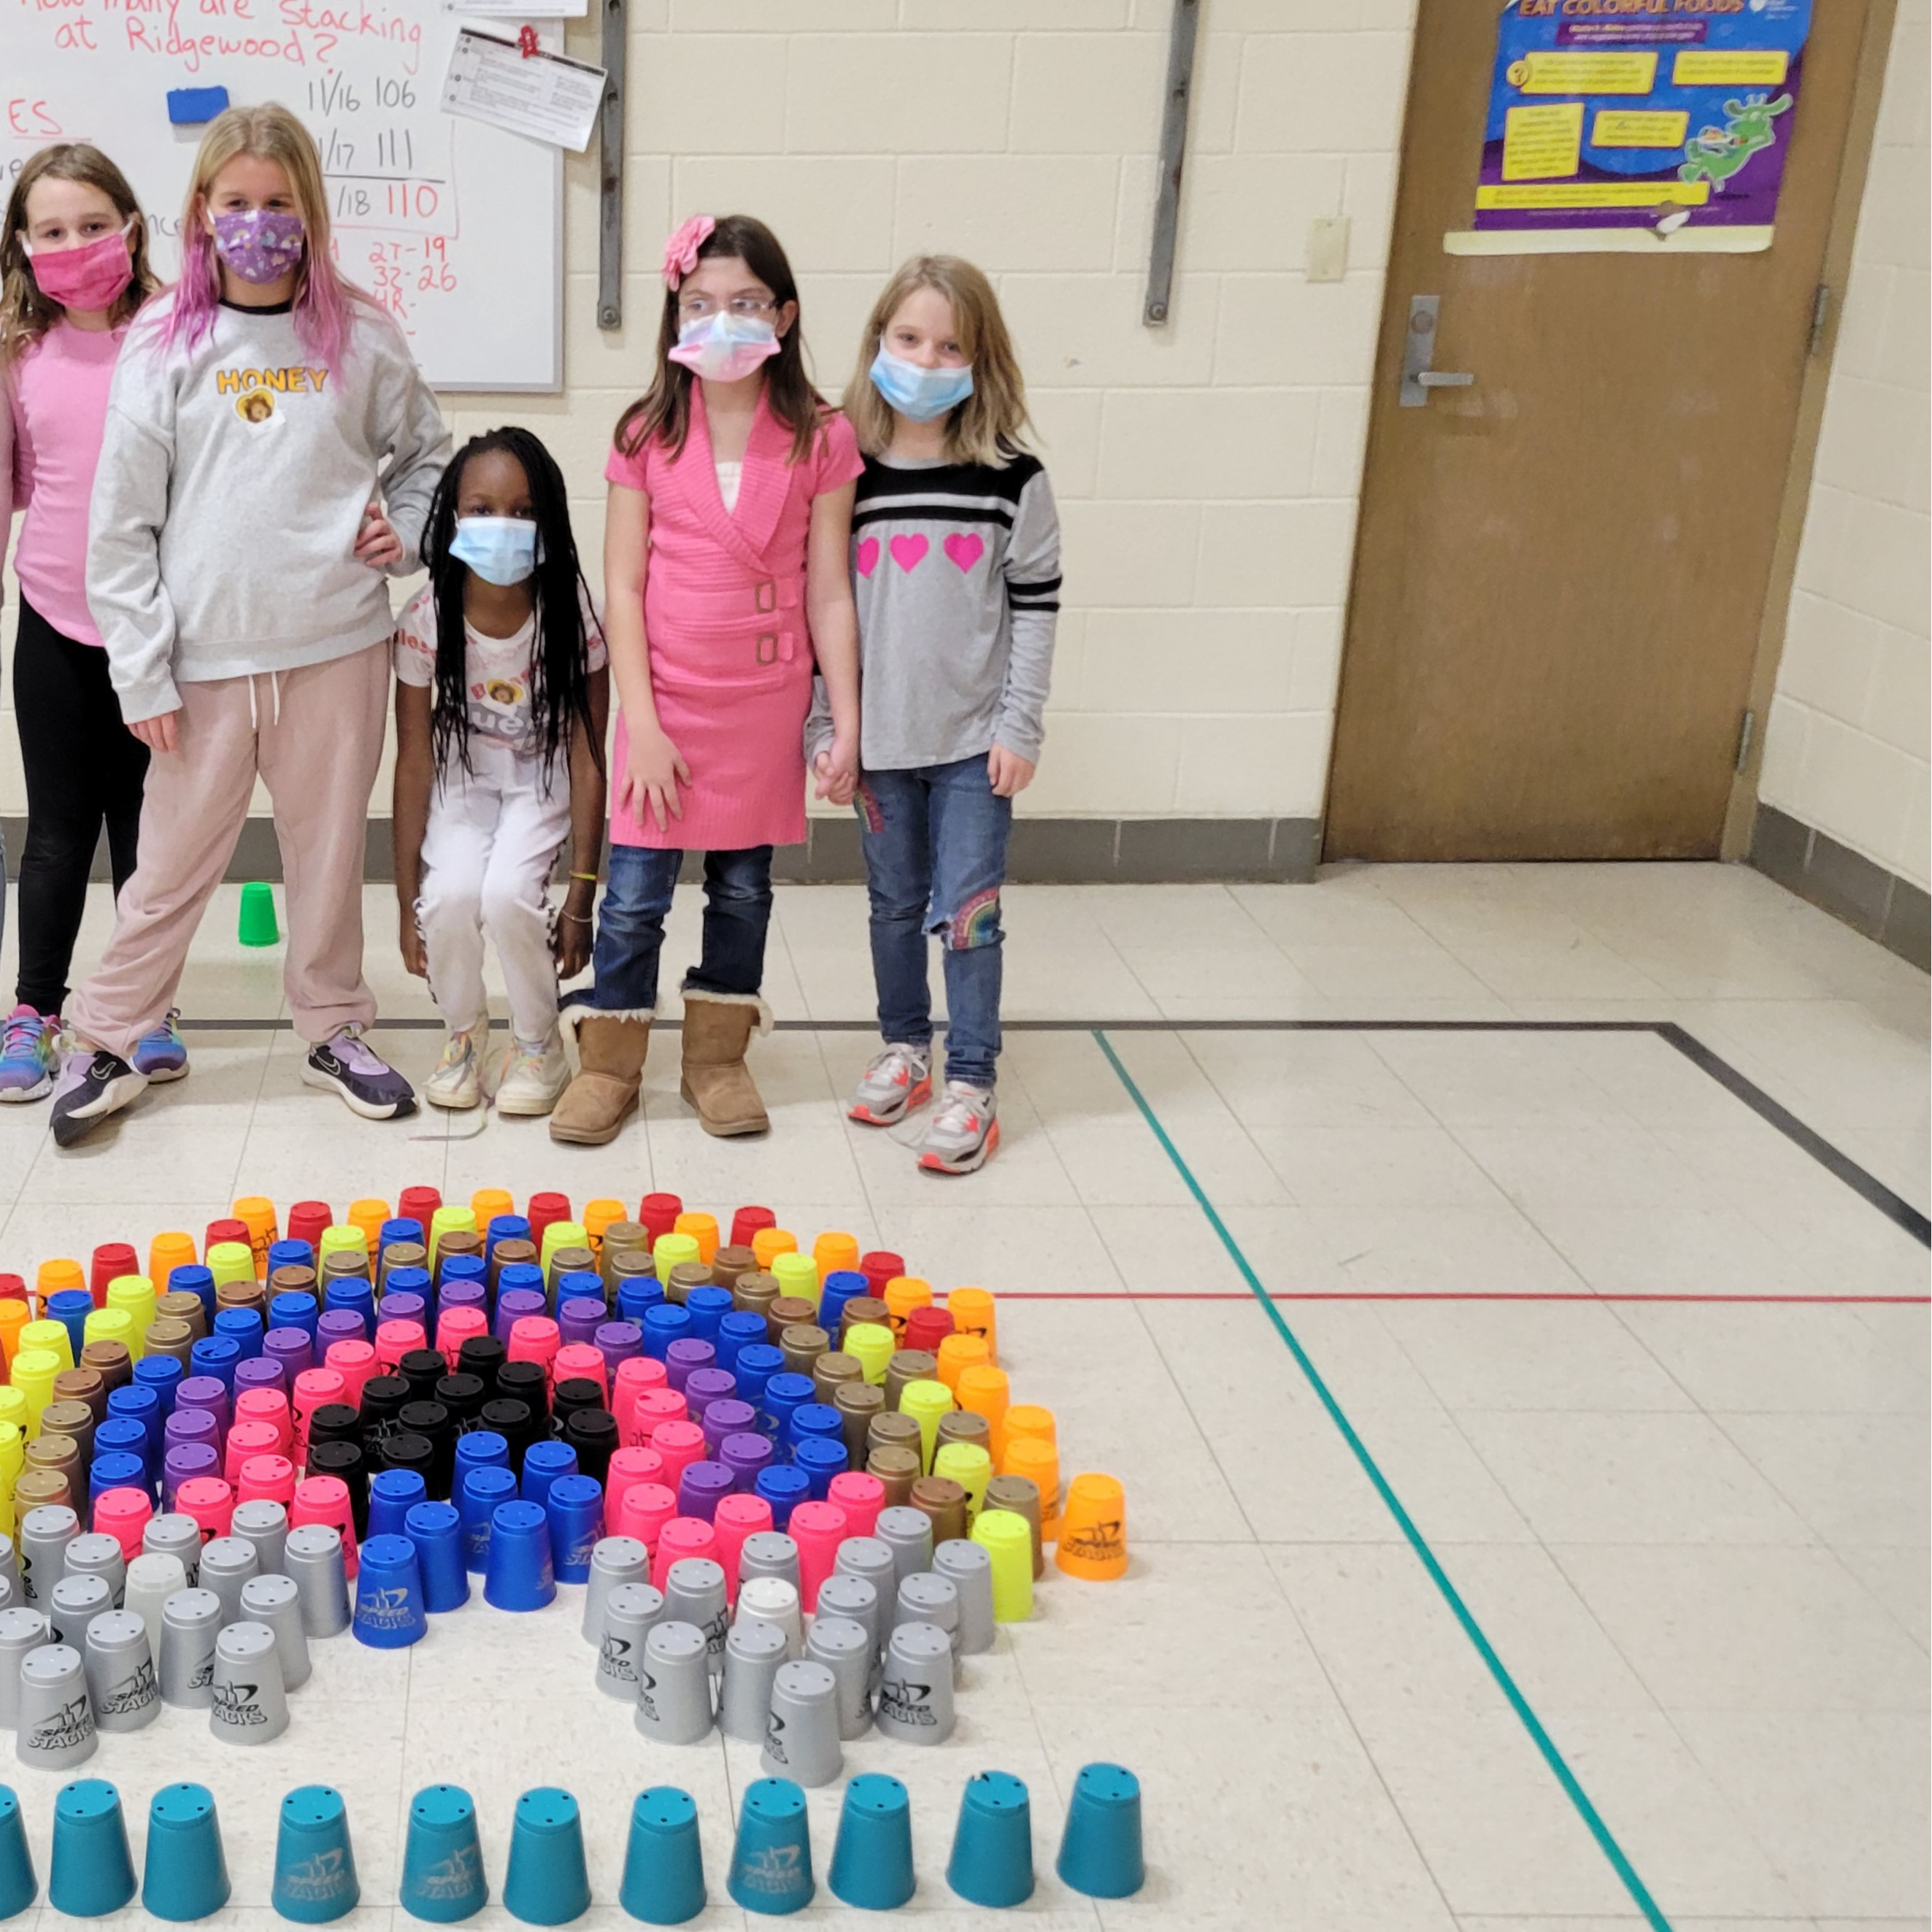 a group of girls stand behind a rainbow they made out of different colored  cups on the floor.  At the bottom of the rainbow the students added gray cups so it looks like clouds under the rainbow